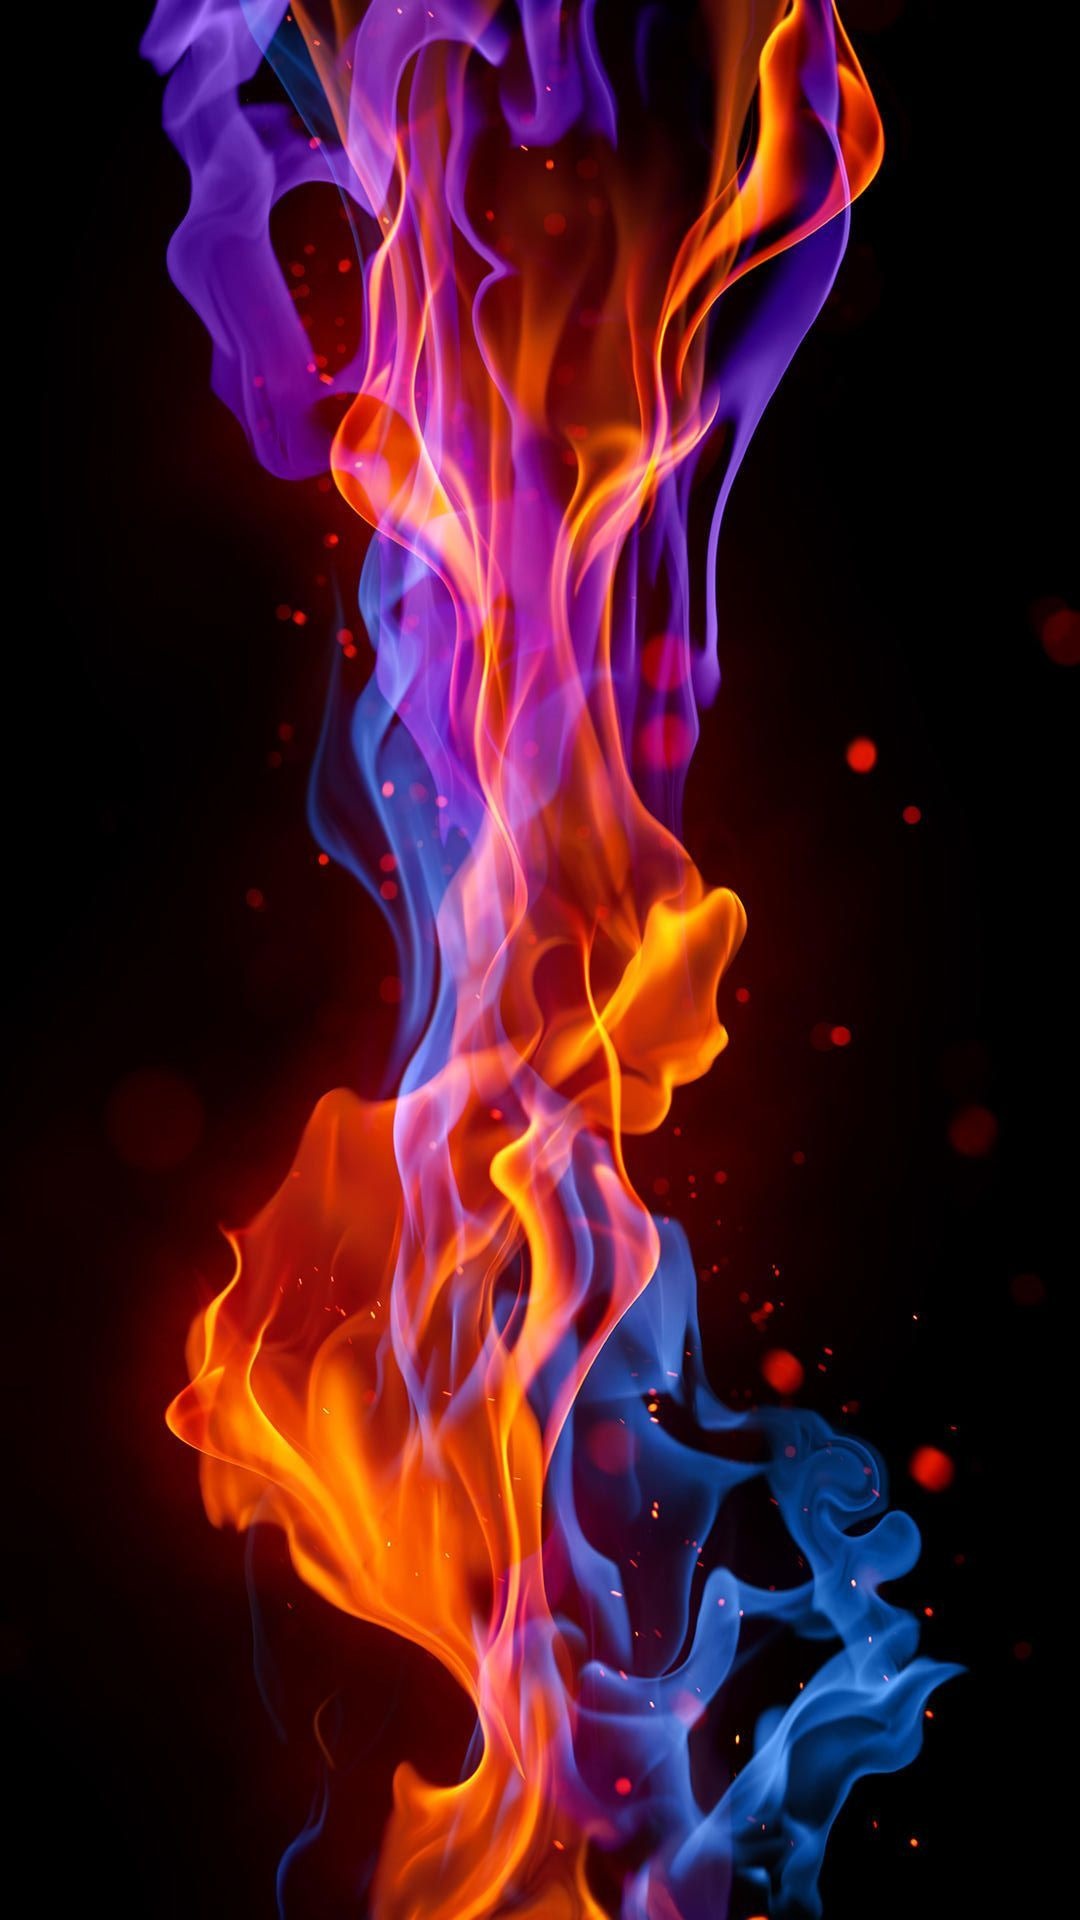 Flaming iPhone wallpapers, Dynamic heat waves, Fiery glow, Vivid color palette, Captivating flames, 1080x1920 Full HD Handy